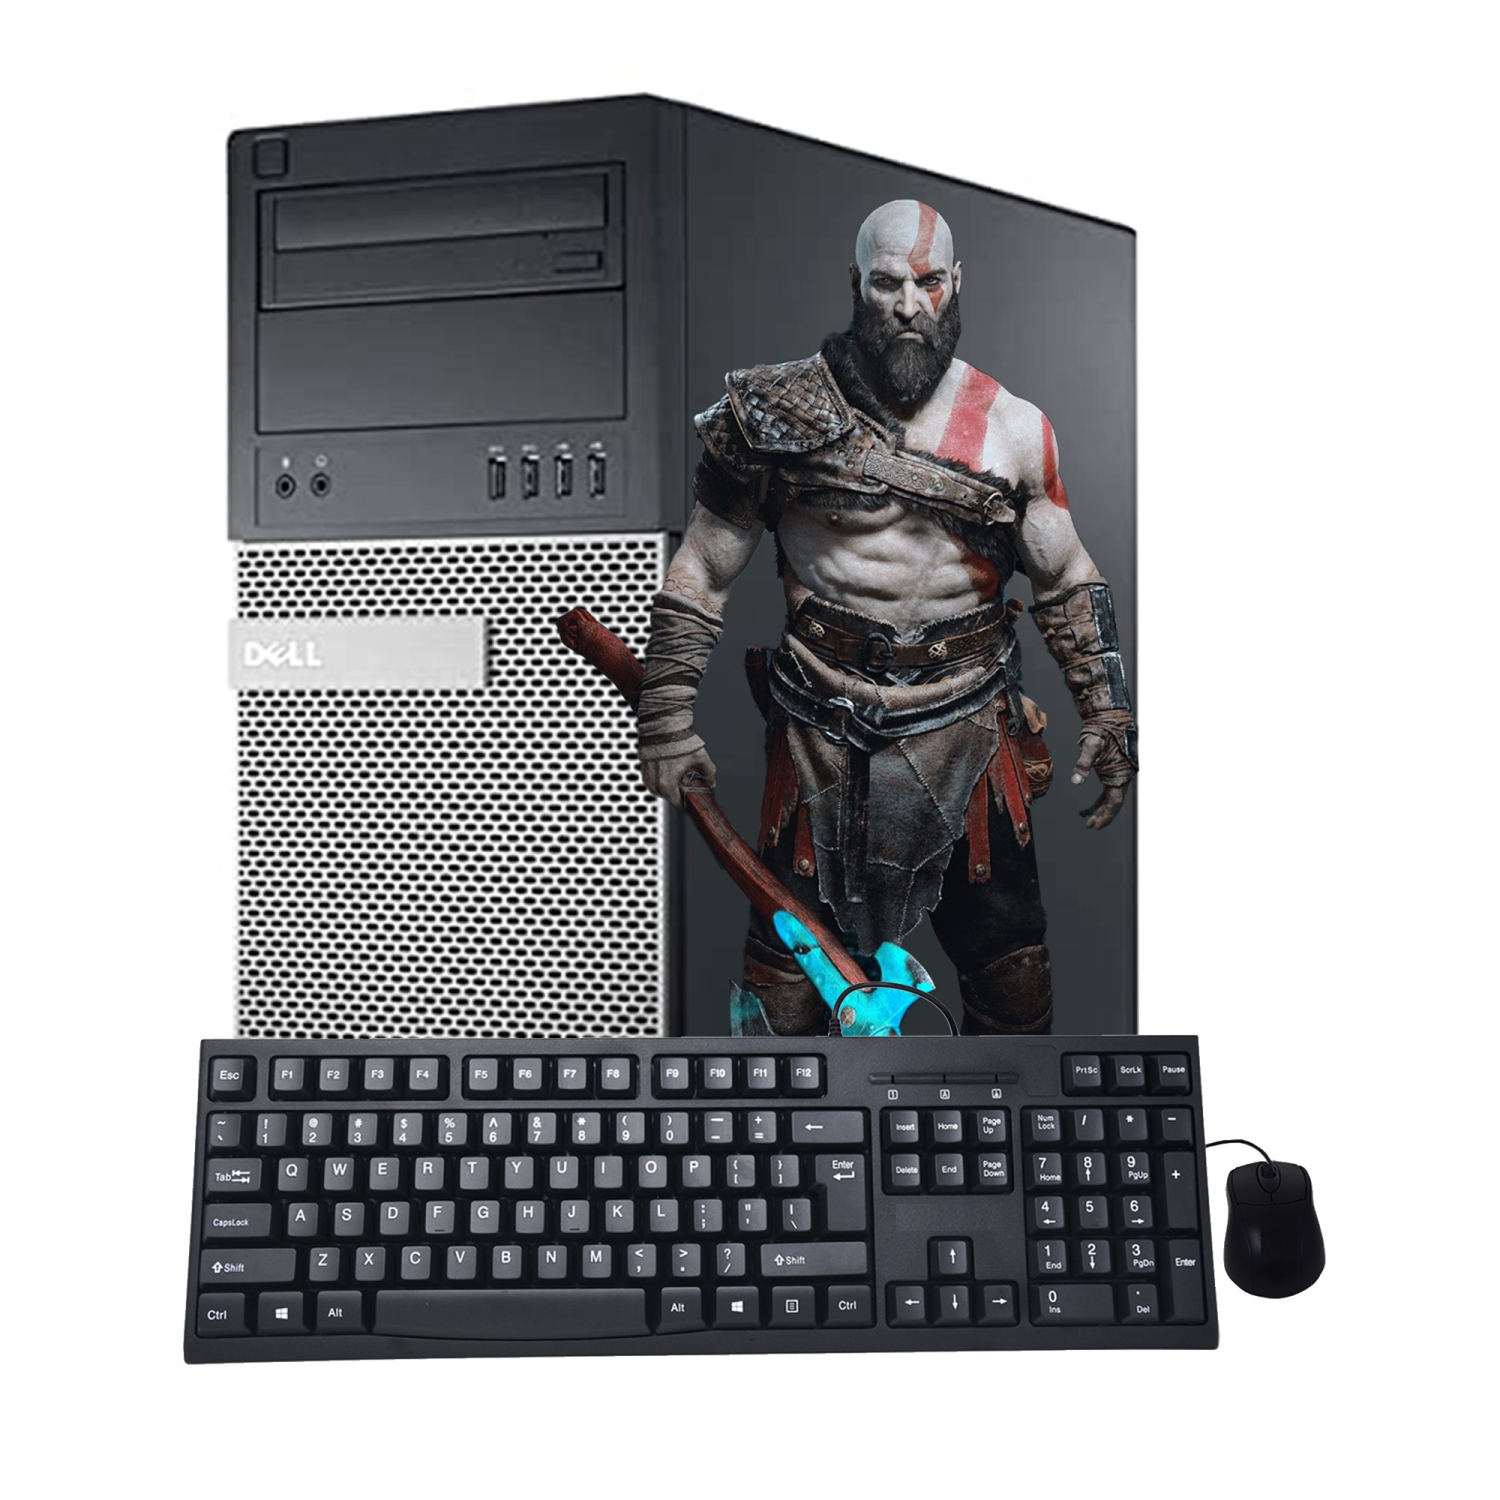 Gaming Desktop Computer Dell 7020 Tower Intel I7 4770 upto 3.90 Ghz 16GB DDR3 RAM New 1TB SSDNvidia GeForce GTX 1650 Keyboard & Mouse Wifi Win 10 Pro - Refurbished